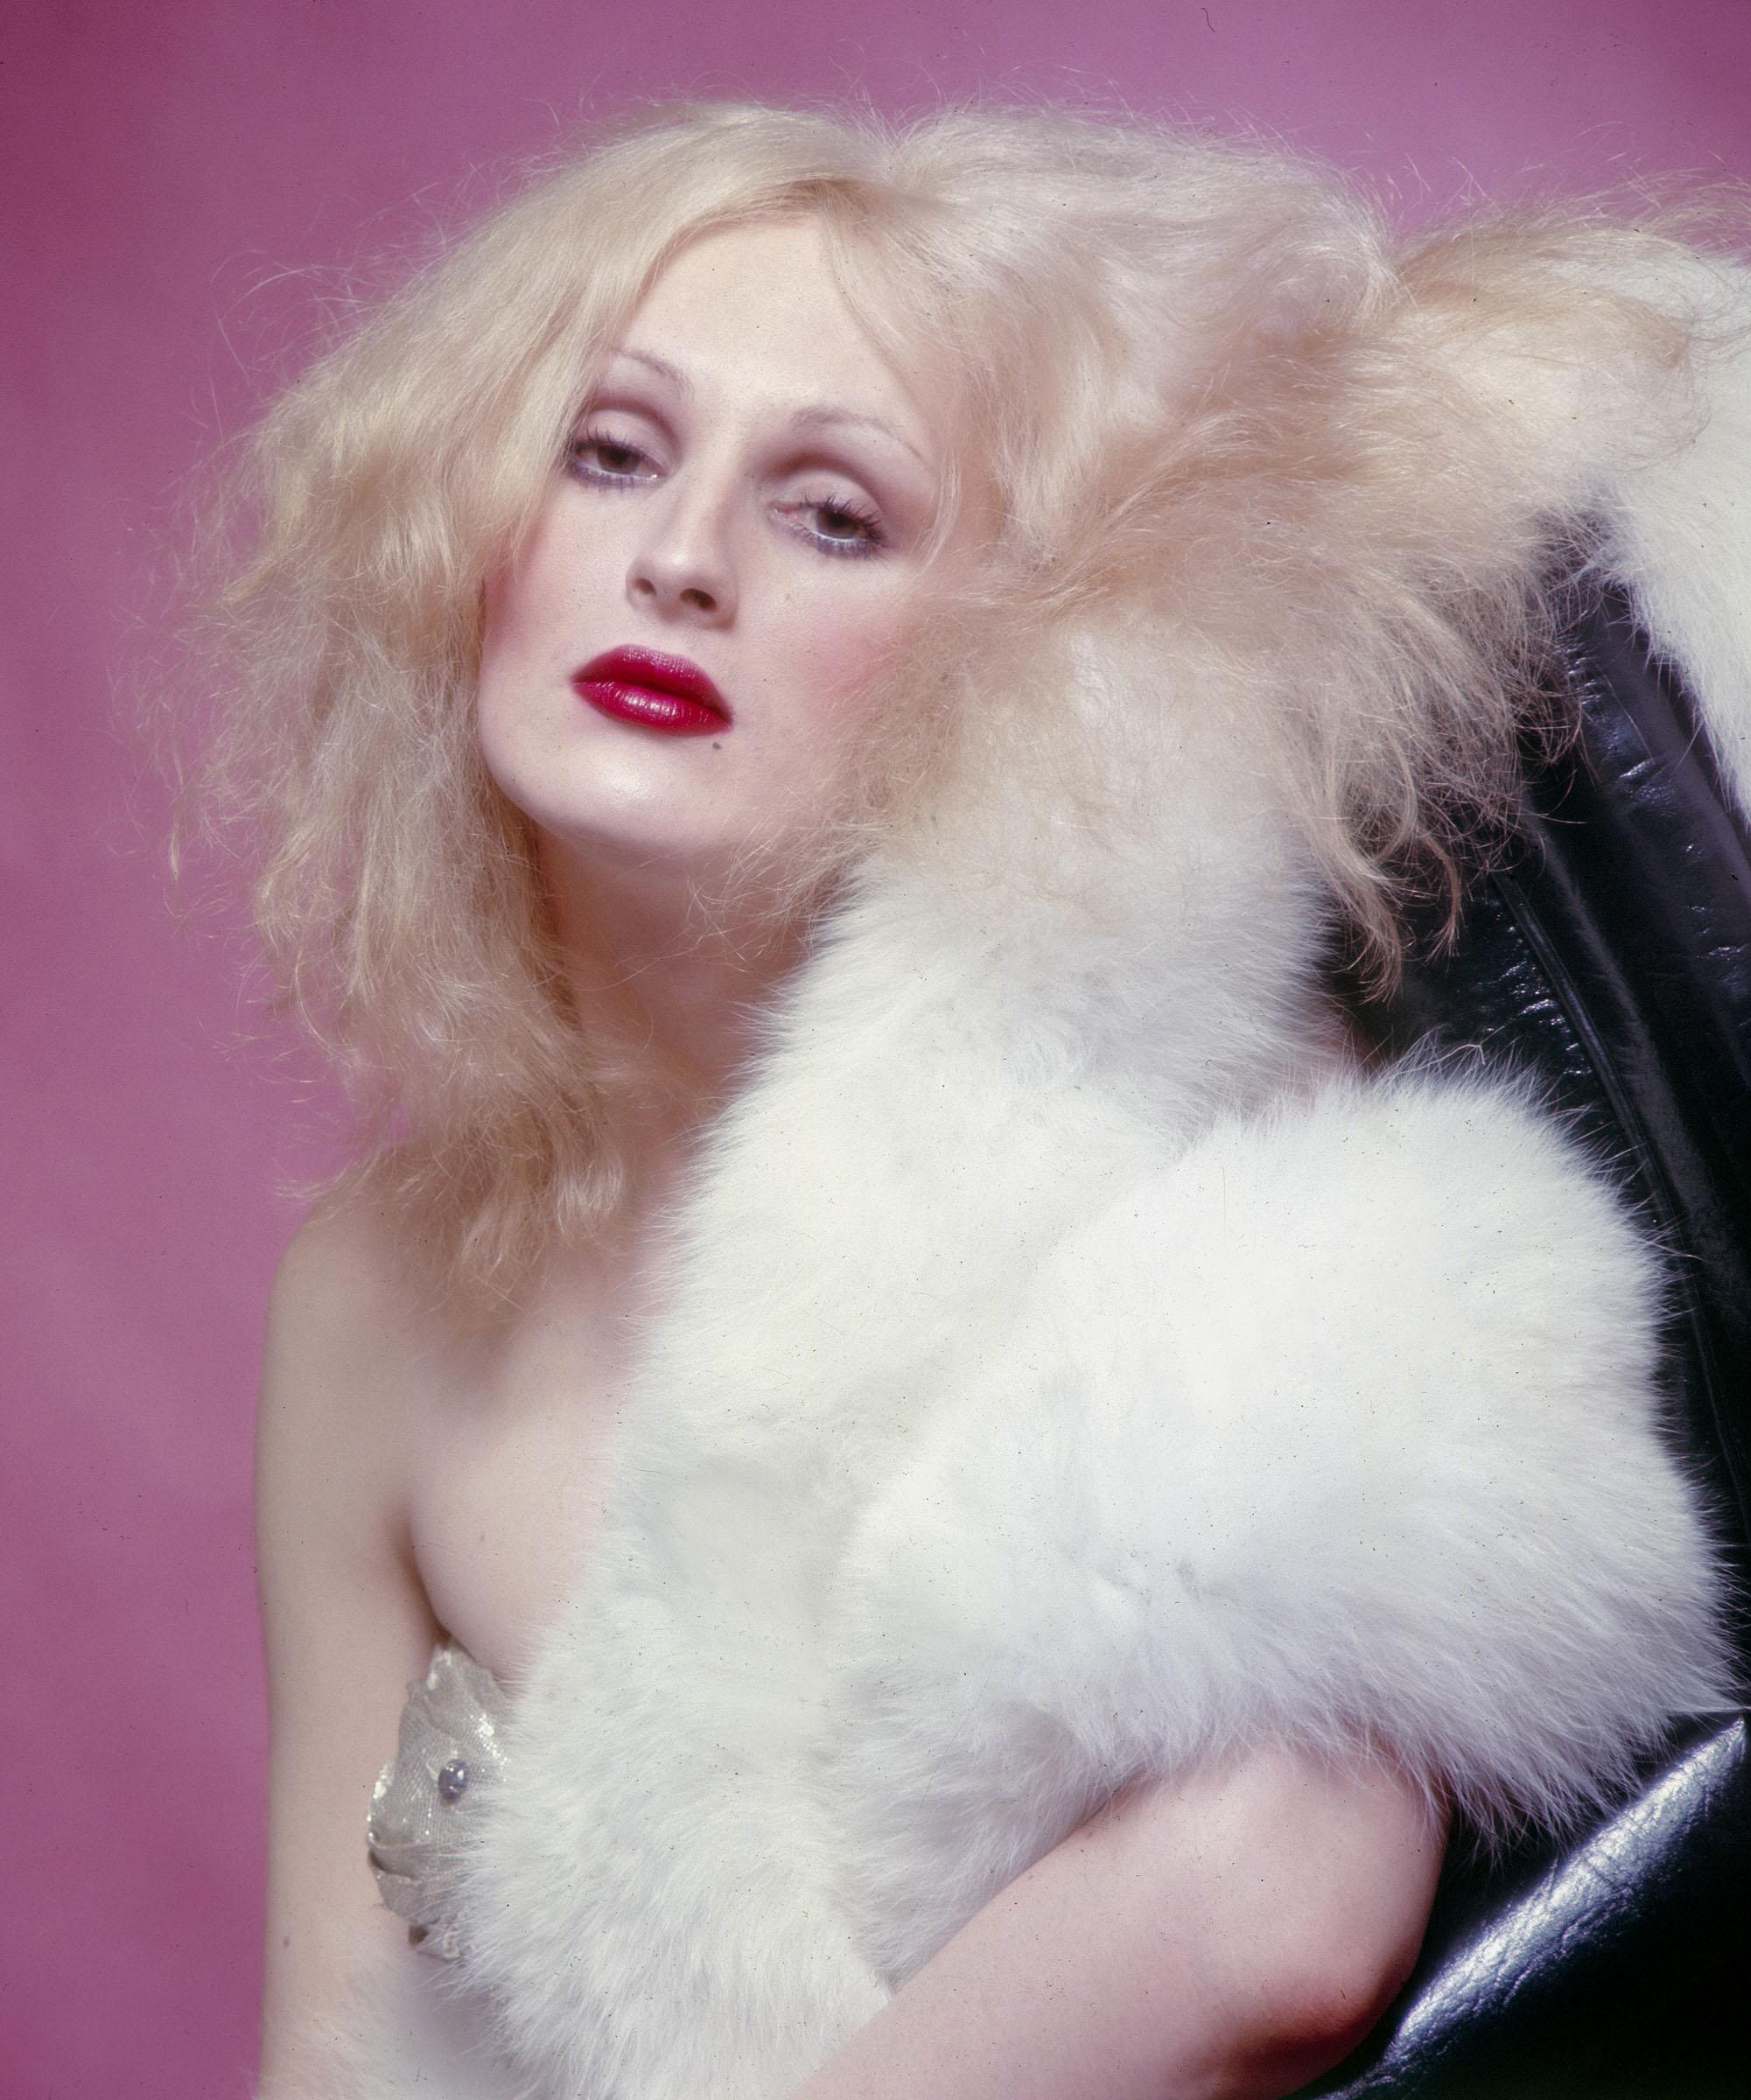 Warhol Superstar Candy Darling star of 'Vain Victory', Color 17 x 22" 